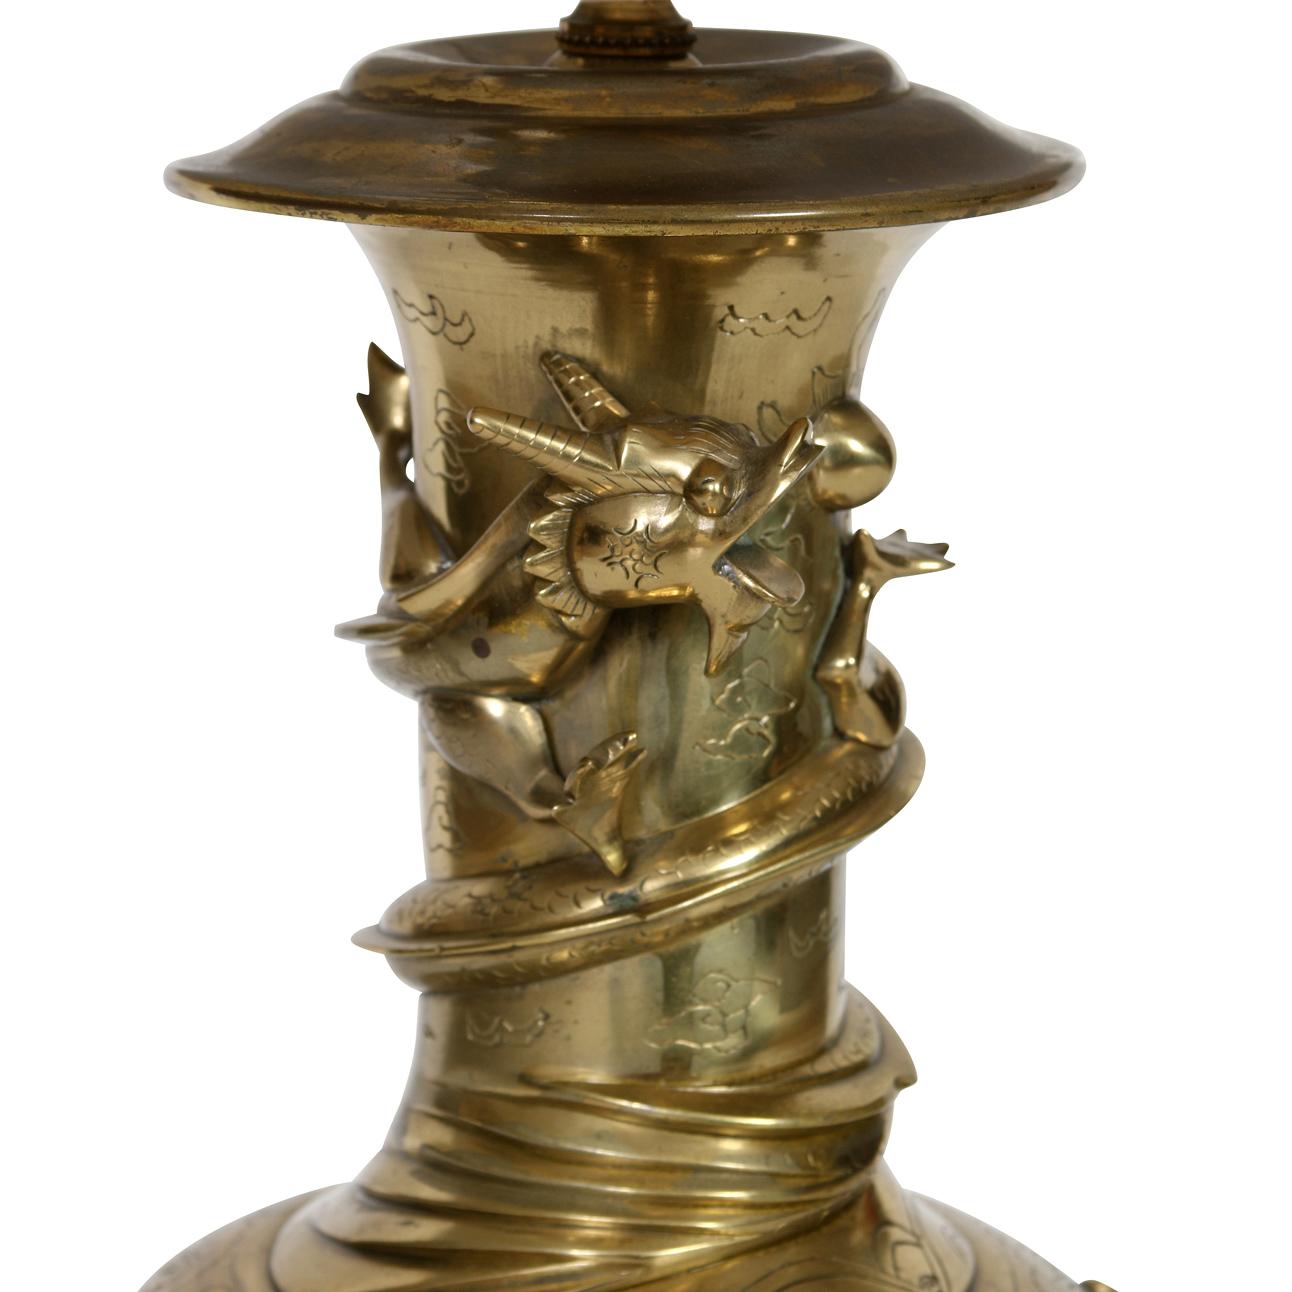 A vintage bronze table lamp wrapped with raised dragons in relief circling the lamp. The Asian style lamp sits on a round dark wood base. The shade is sold separately.